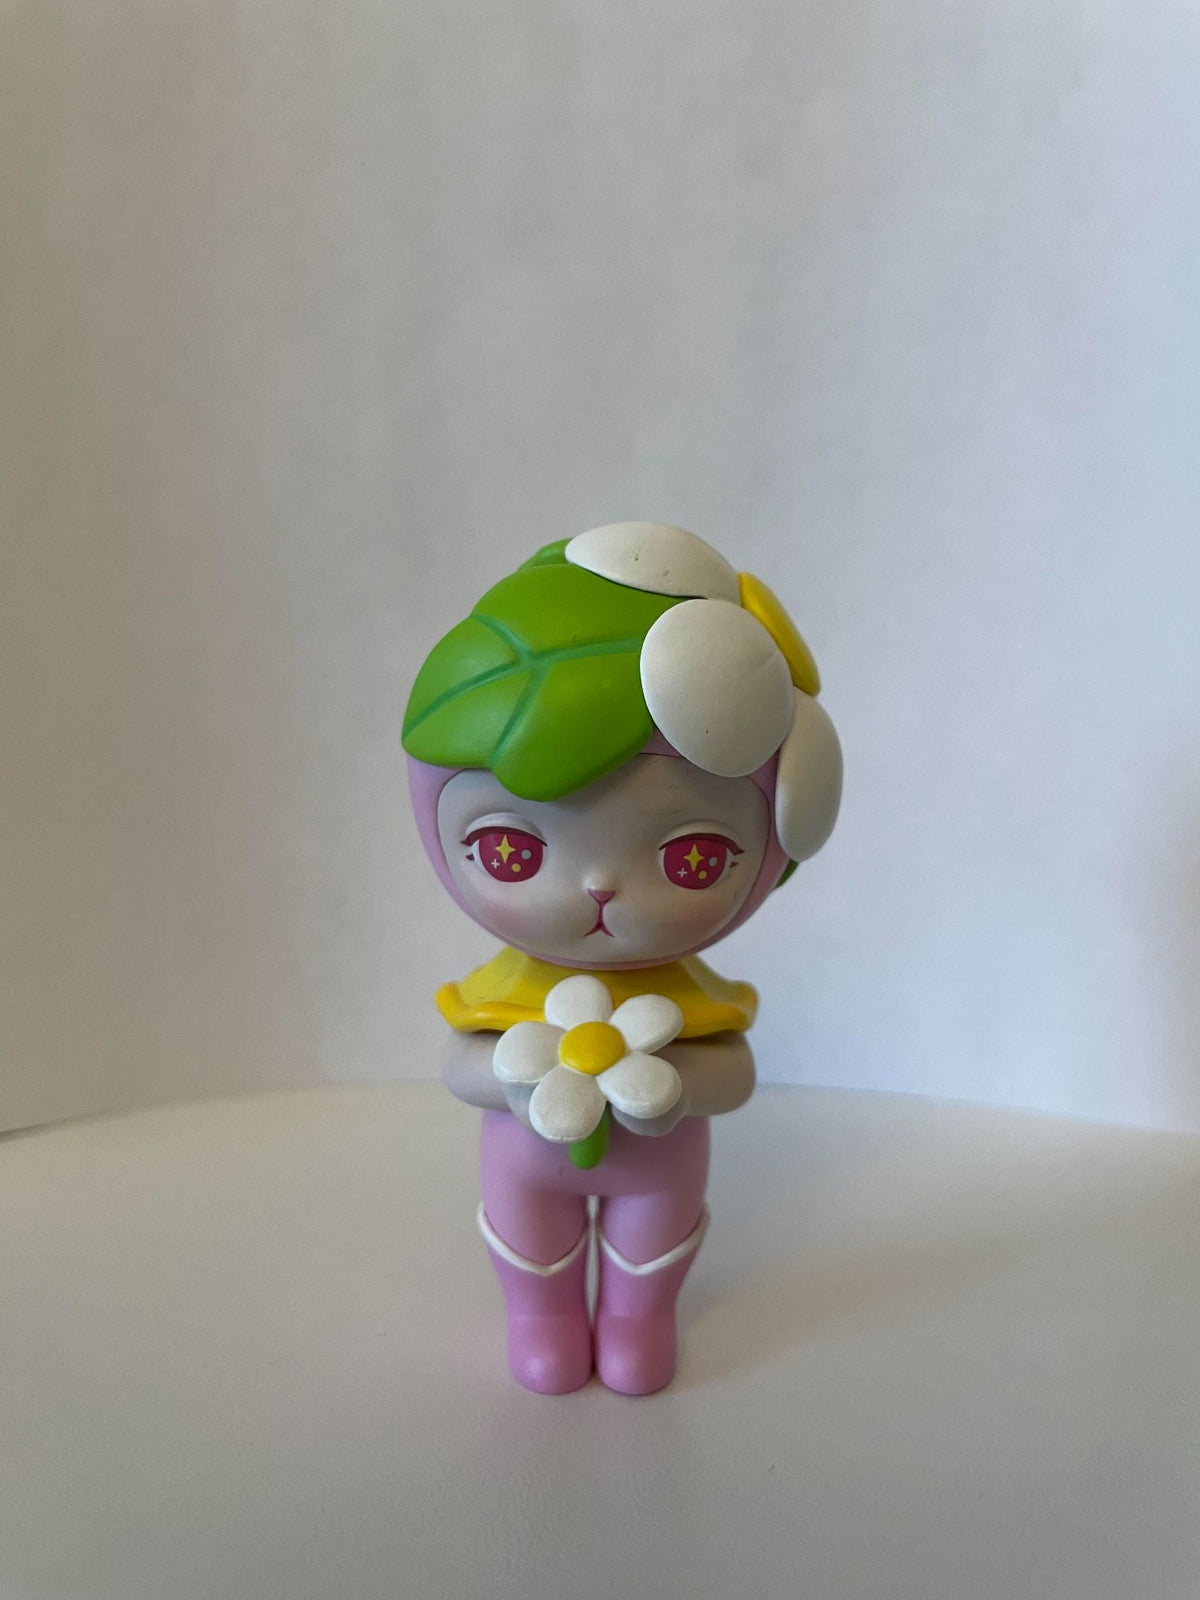 Primrose - Bunny Forest Blind Box Toy Series by POP MART - 1